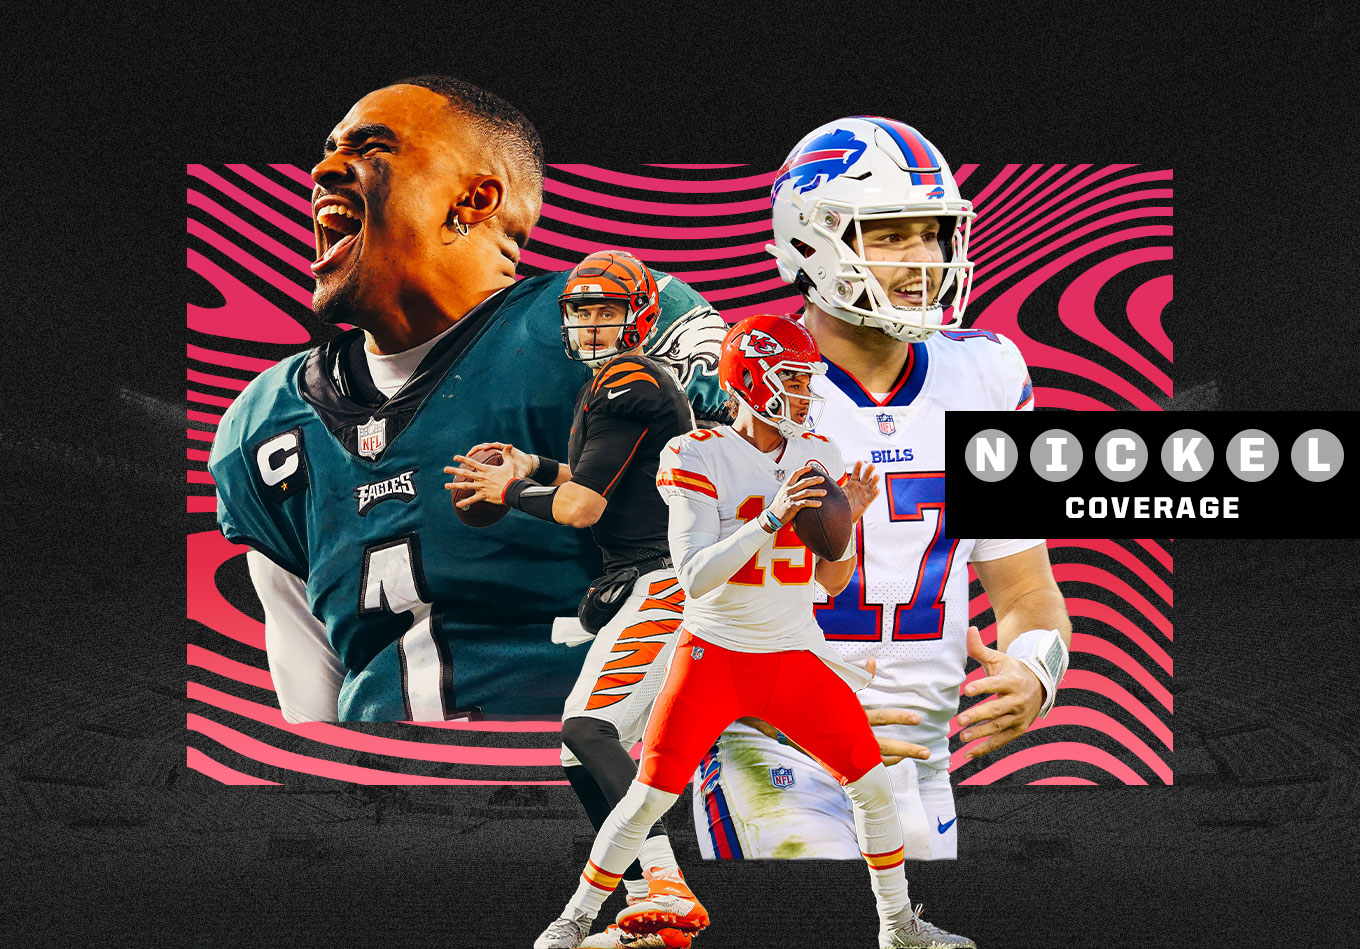 Ranking the Finalists: The NFL MVP Race Is Down to Four Quarterbacks